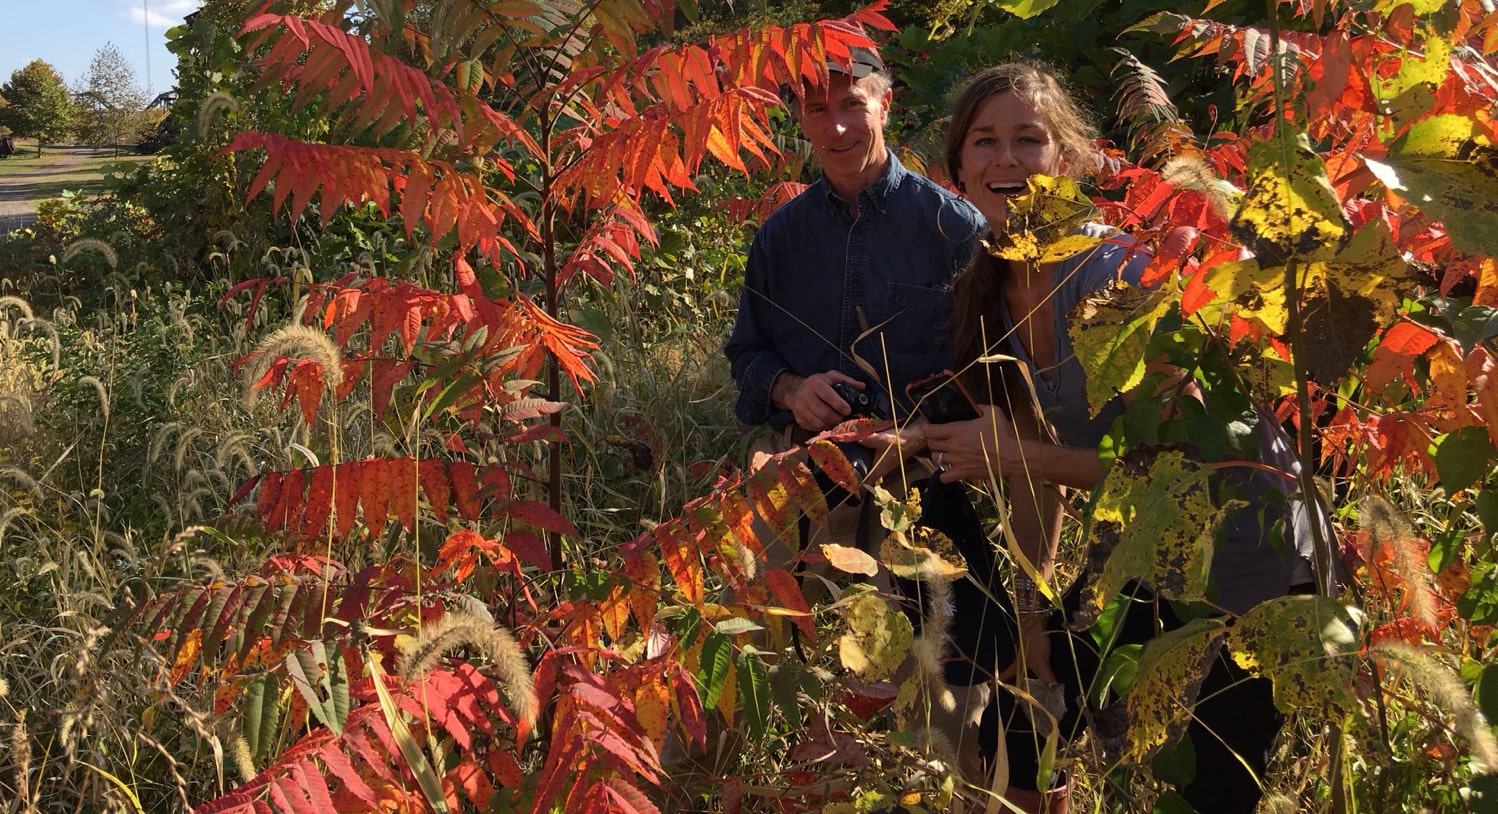 Photo of a man and woman smiling while walking through Chatham University's arboretum together surrounded by colorful leaves.